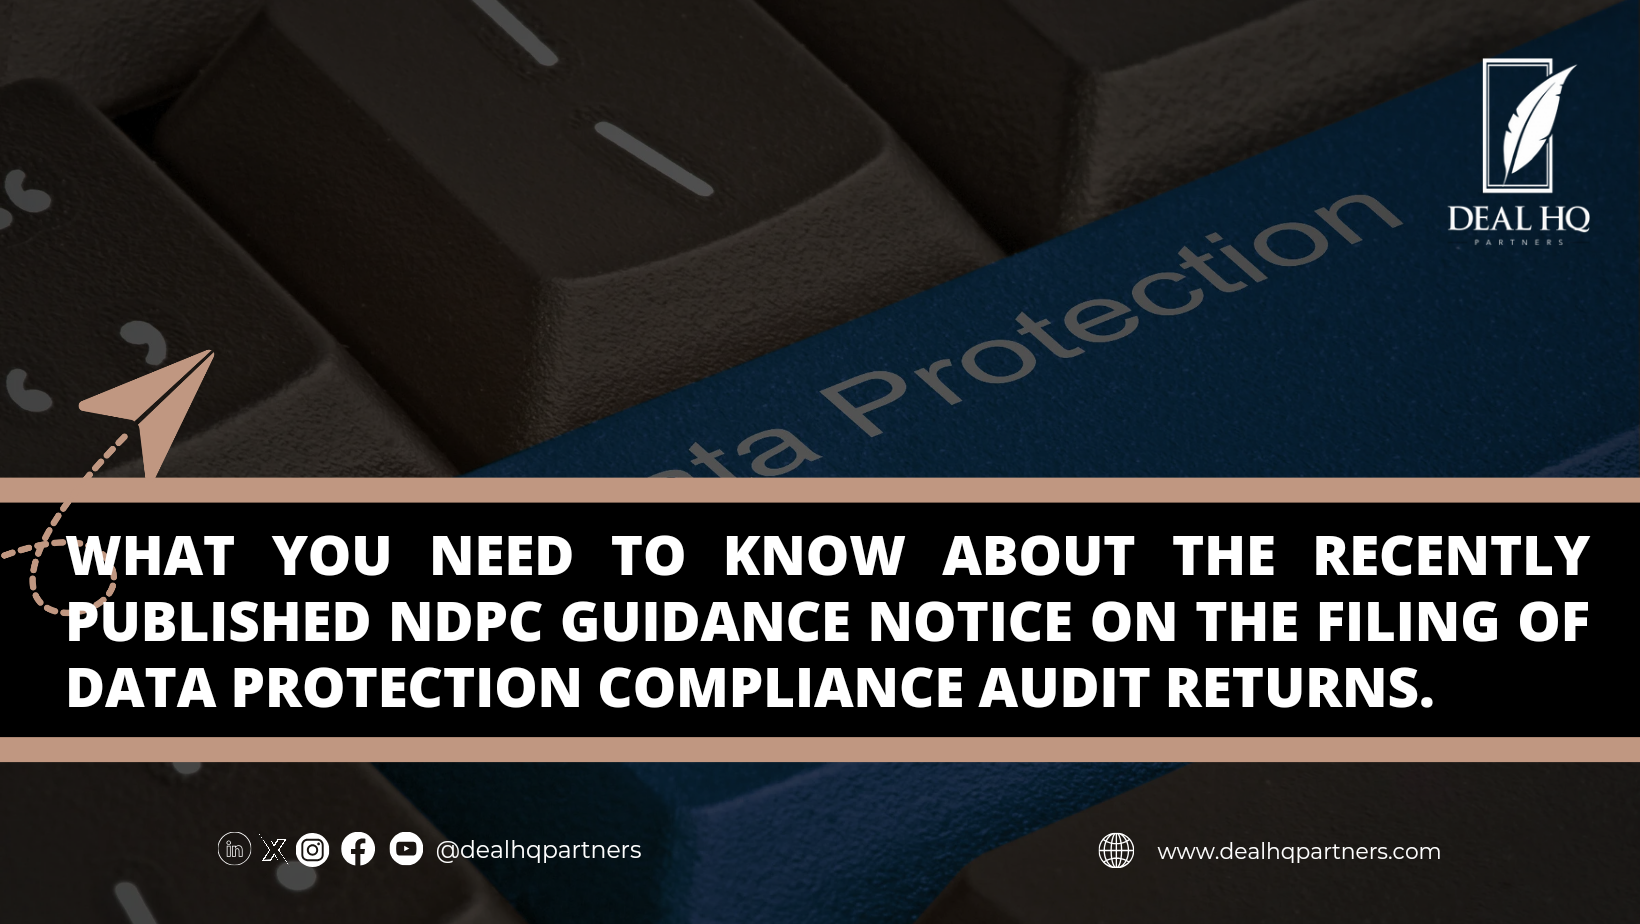 WHAT YOU NEED TO KNOW ABOUT THE RECENTLY PUBLISHED NDPC GUIDANCE NOTICE ON THE FILING OF DATA PROTECTION COMPLIANCE AUDIT RETURNS.